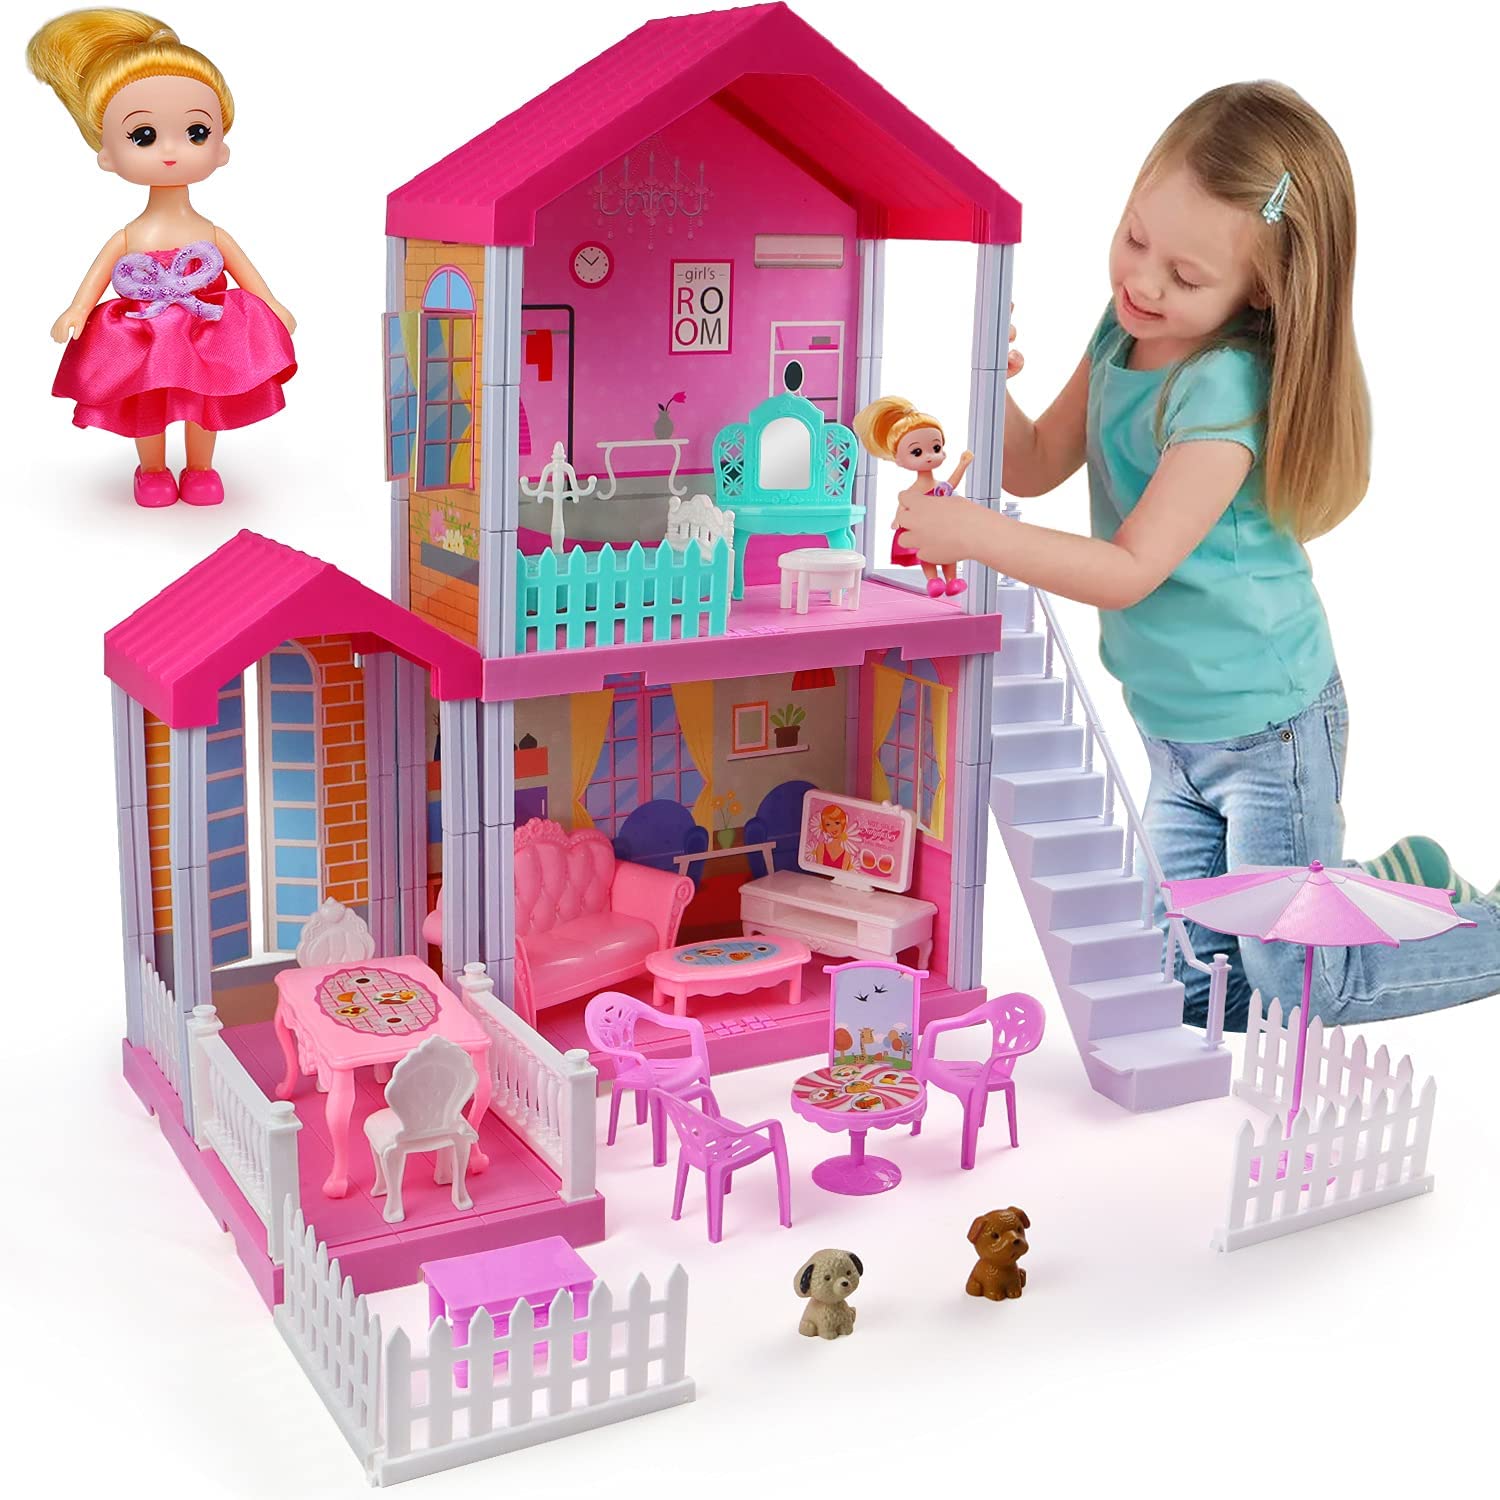 Review of aotipol Dollhouse Dreamhouse with Cloister, Stairs and Yard